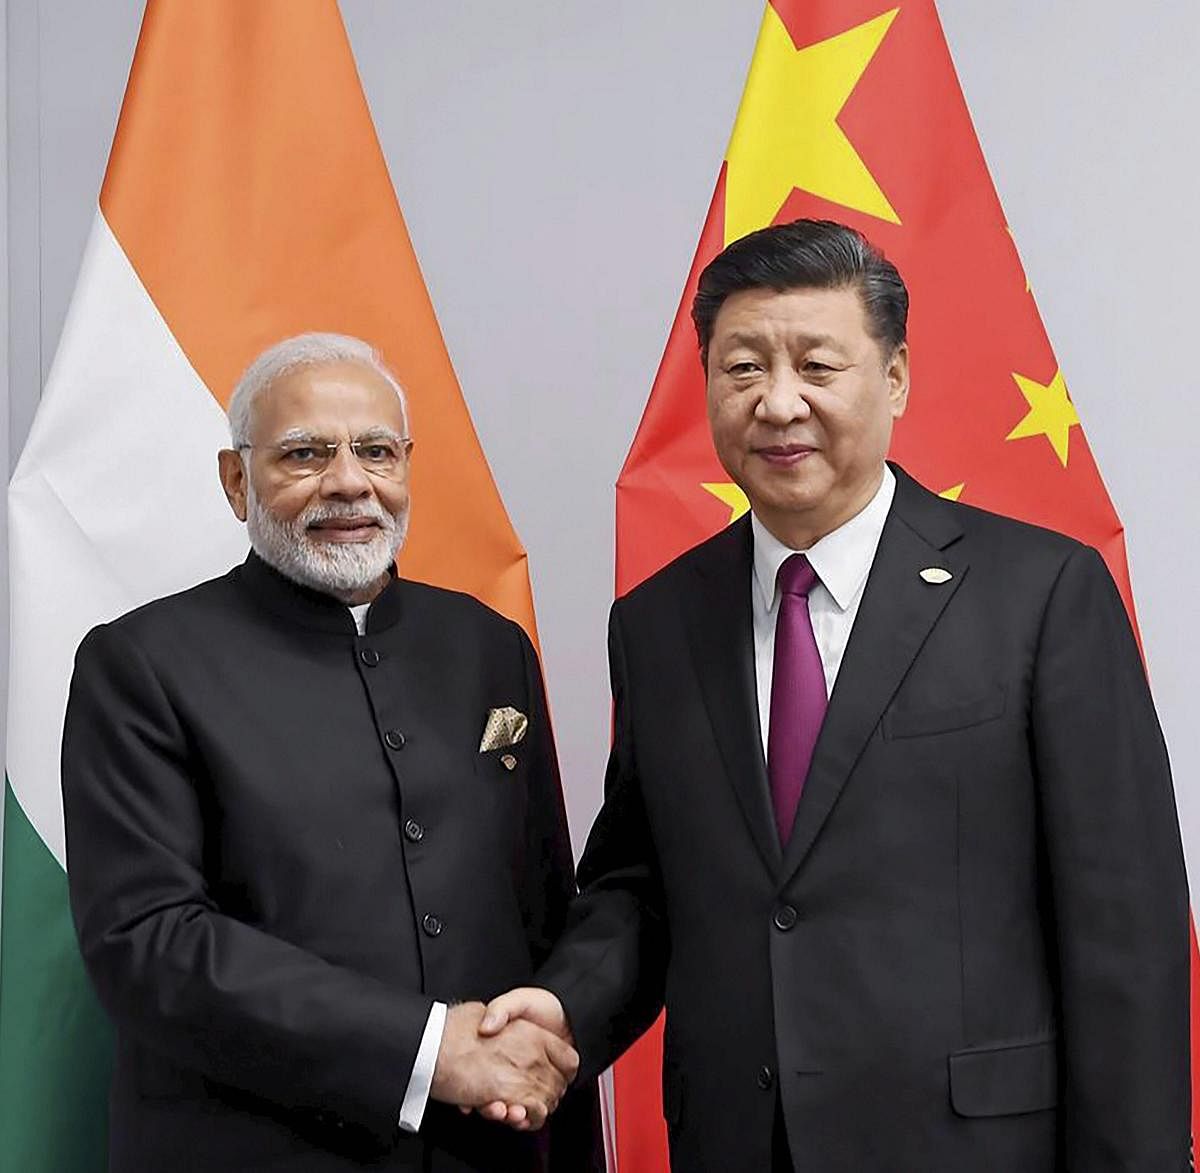 Prime Minister Narendra Modi shakes hands with Chinese President Xi Jinping on the sidelines of G-20 summit, in Buenos Aires, Friday, Nov. 30, 2018. (PIB Photo via PTI)